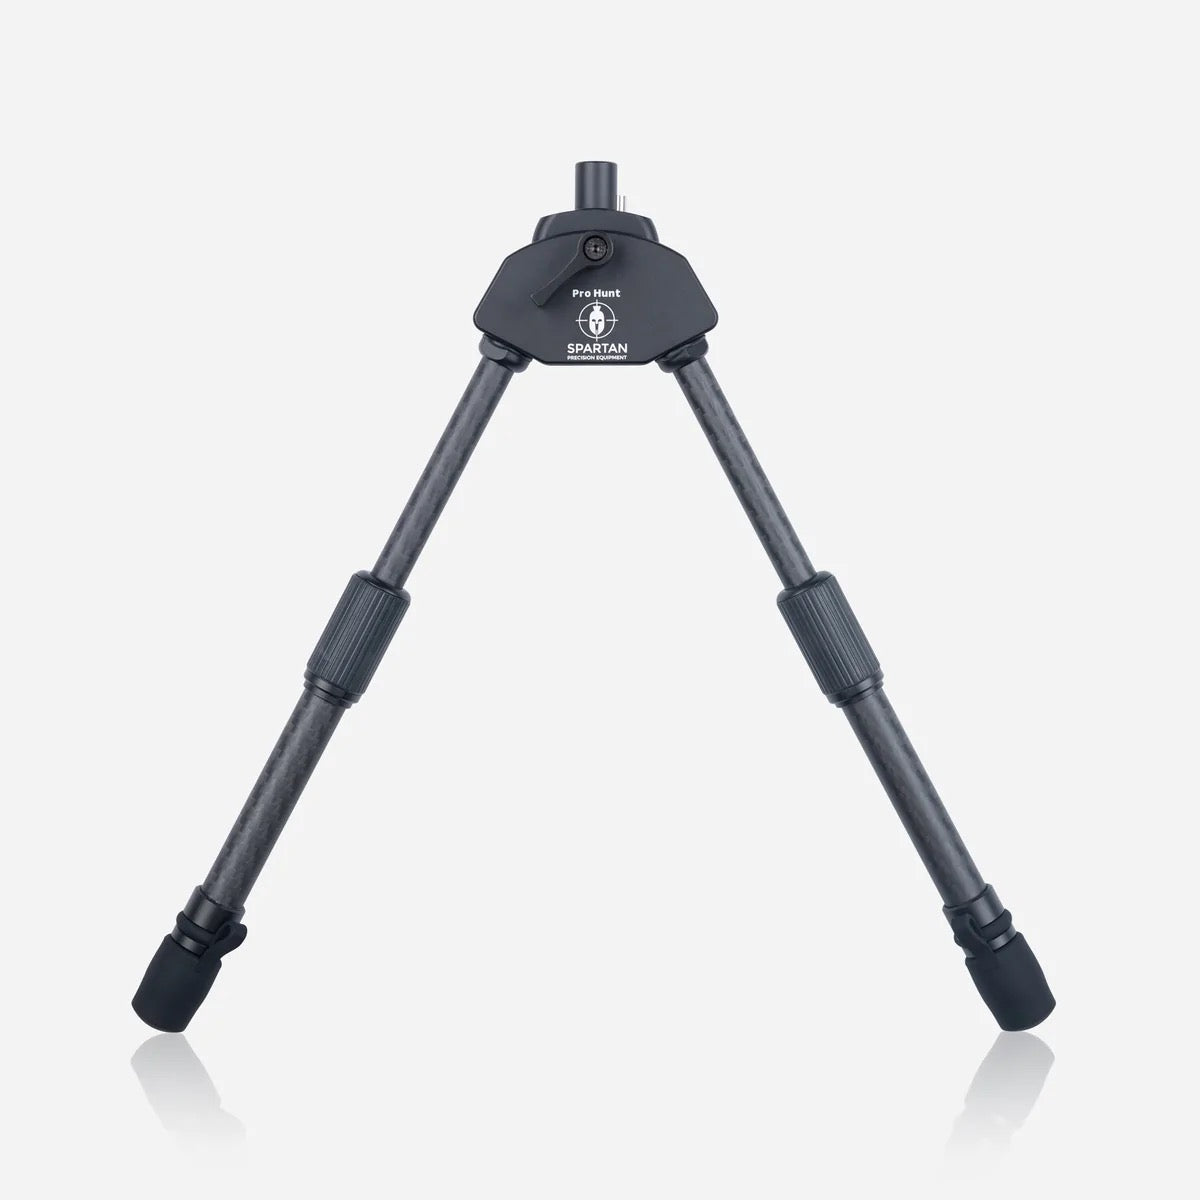 SPARTAN PRECISION - Javelin Pro Hunt Bipod (Now in BLACK) - Shooting Warehouse